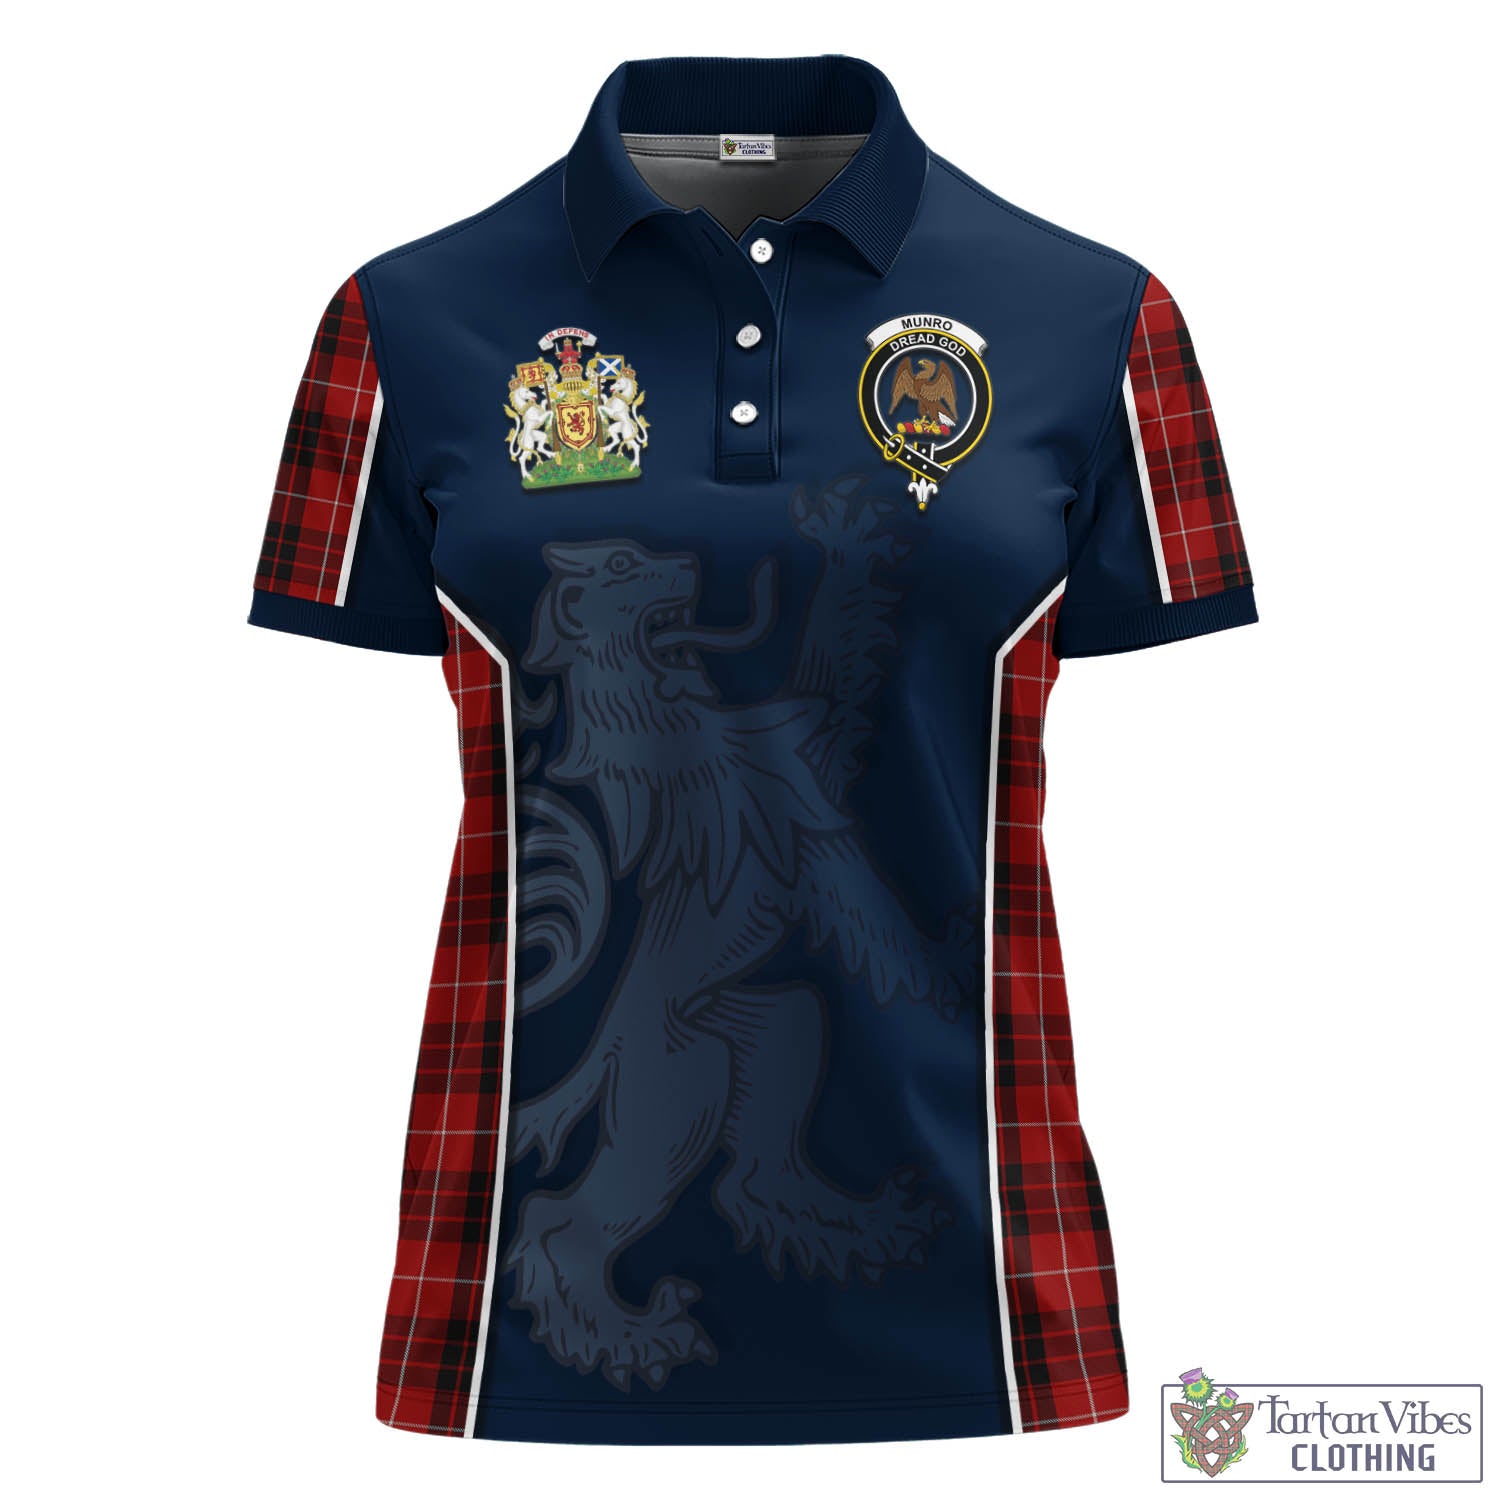 Tartan Vibes Clothing Munro Black and Red Tartan Women's Polo Shirt with Family Crest and Lion Rampant Vibes Sport Style